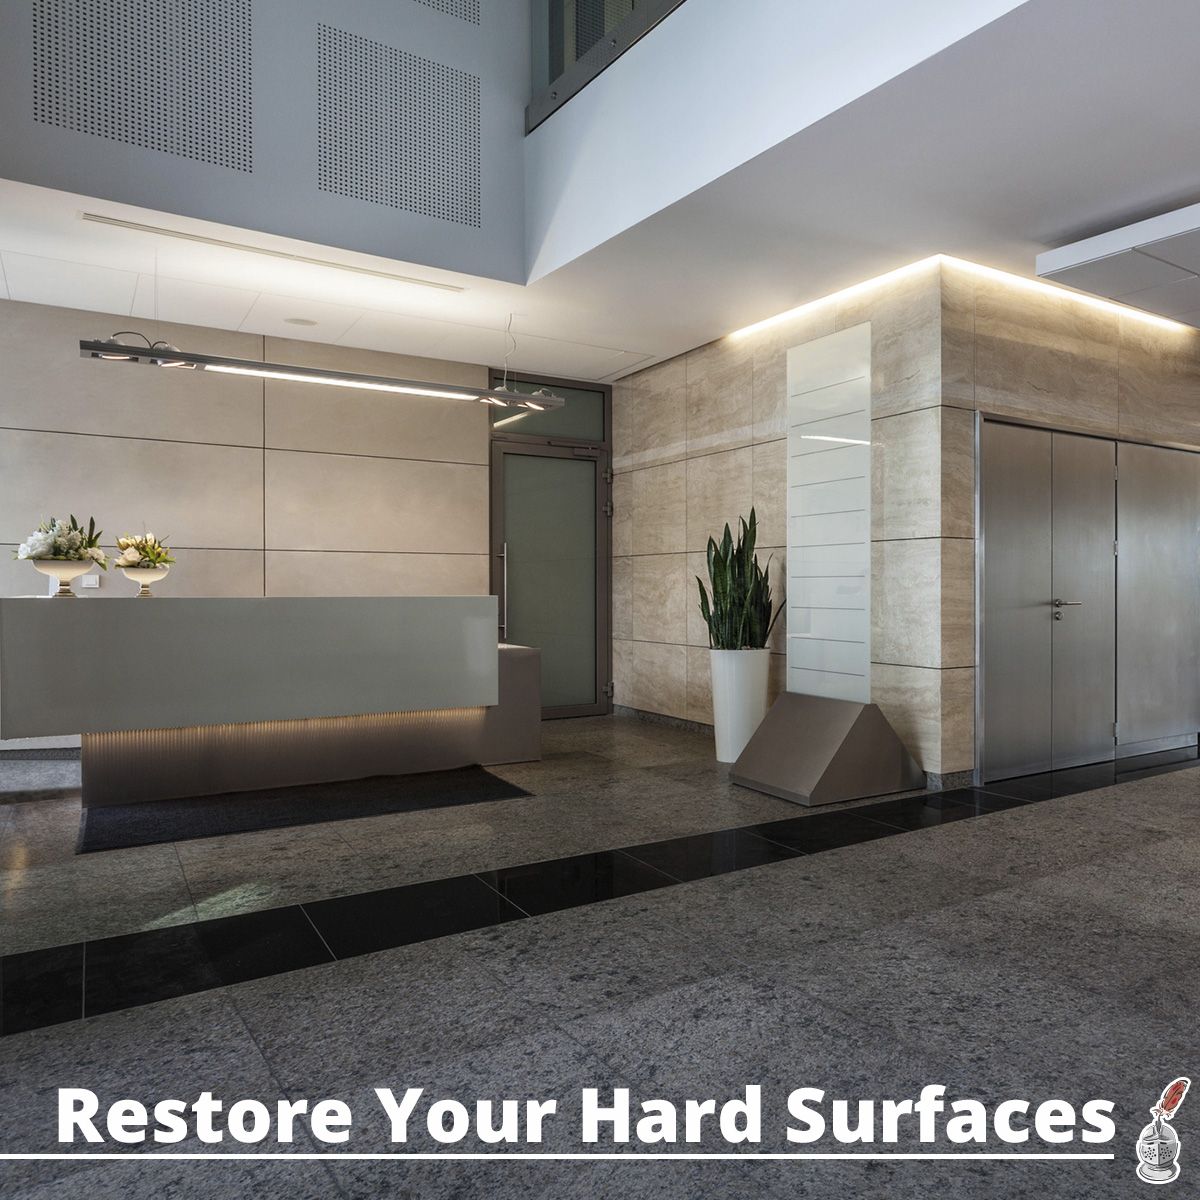 Restore Your Hard Surfaces